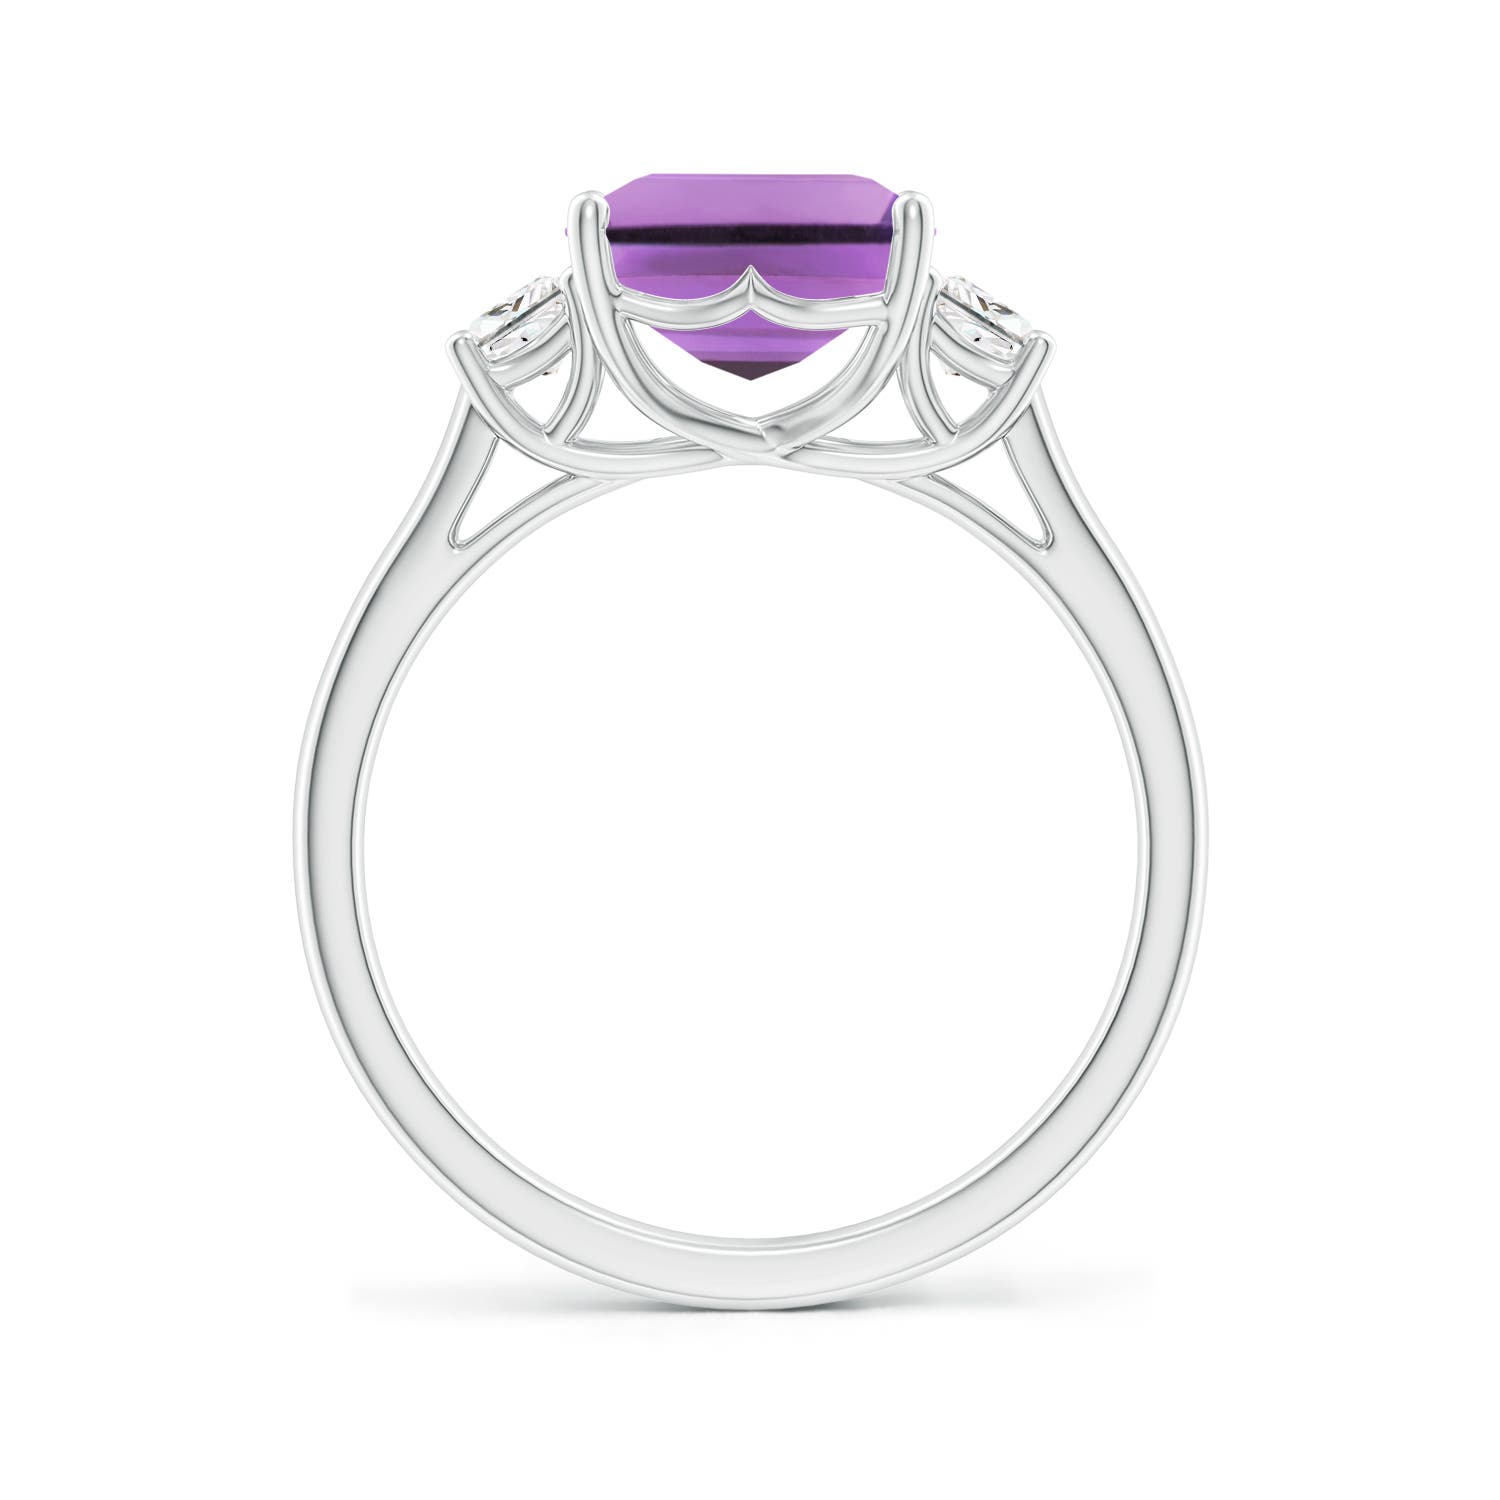 A- Amethyst / 3.22 CT / 14 KT White Gold